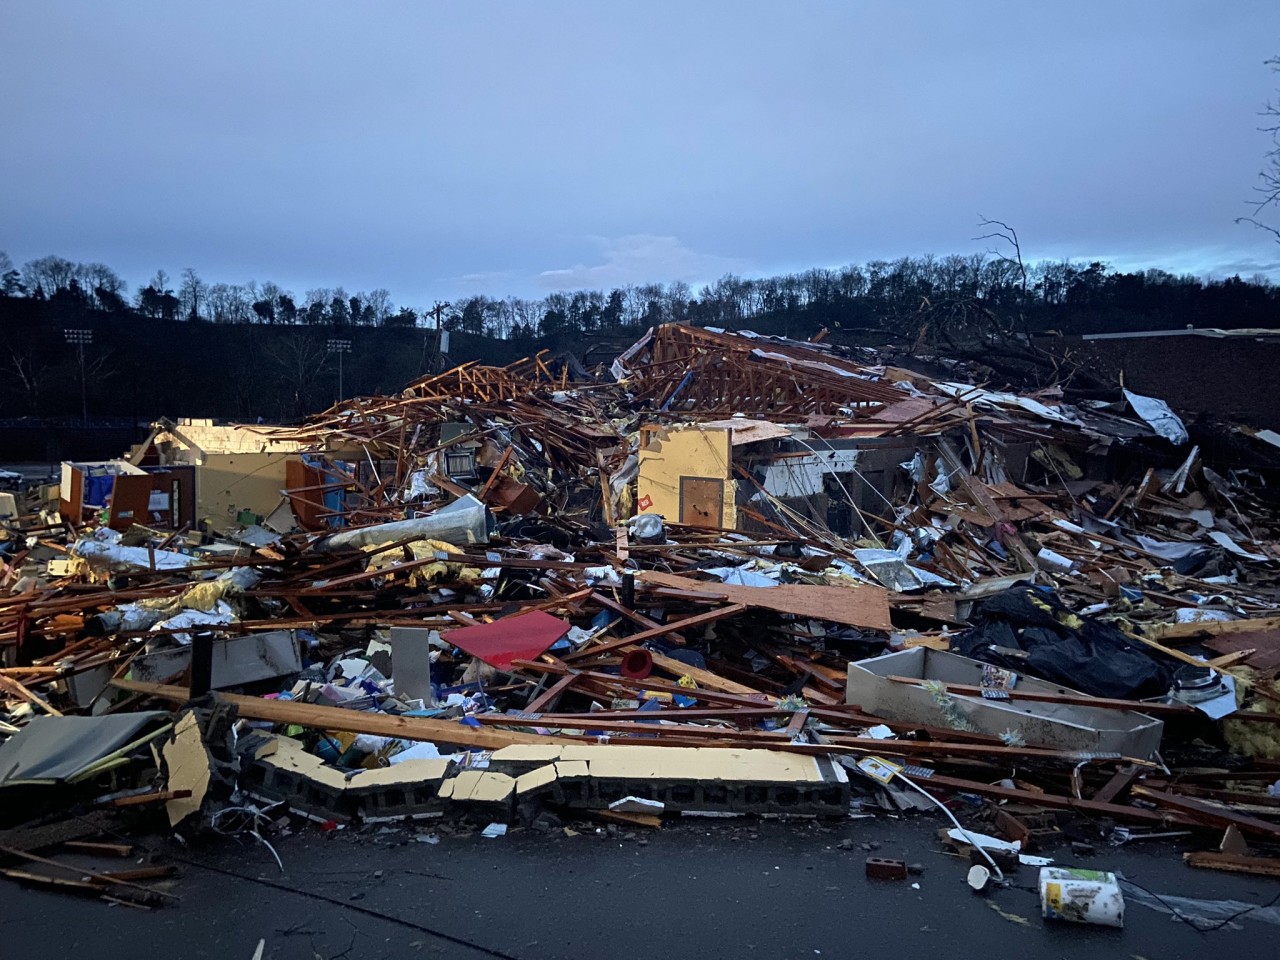 Donelson Christian Academy destroyed by tornado after a tornado hit the The Donelson area of Davidson County in Middle Tennessee.